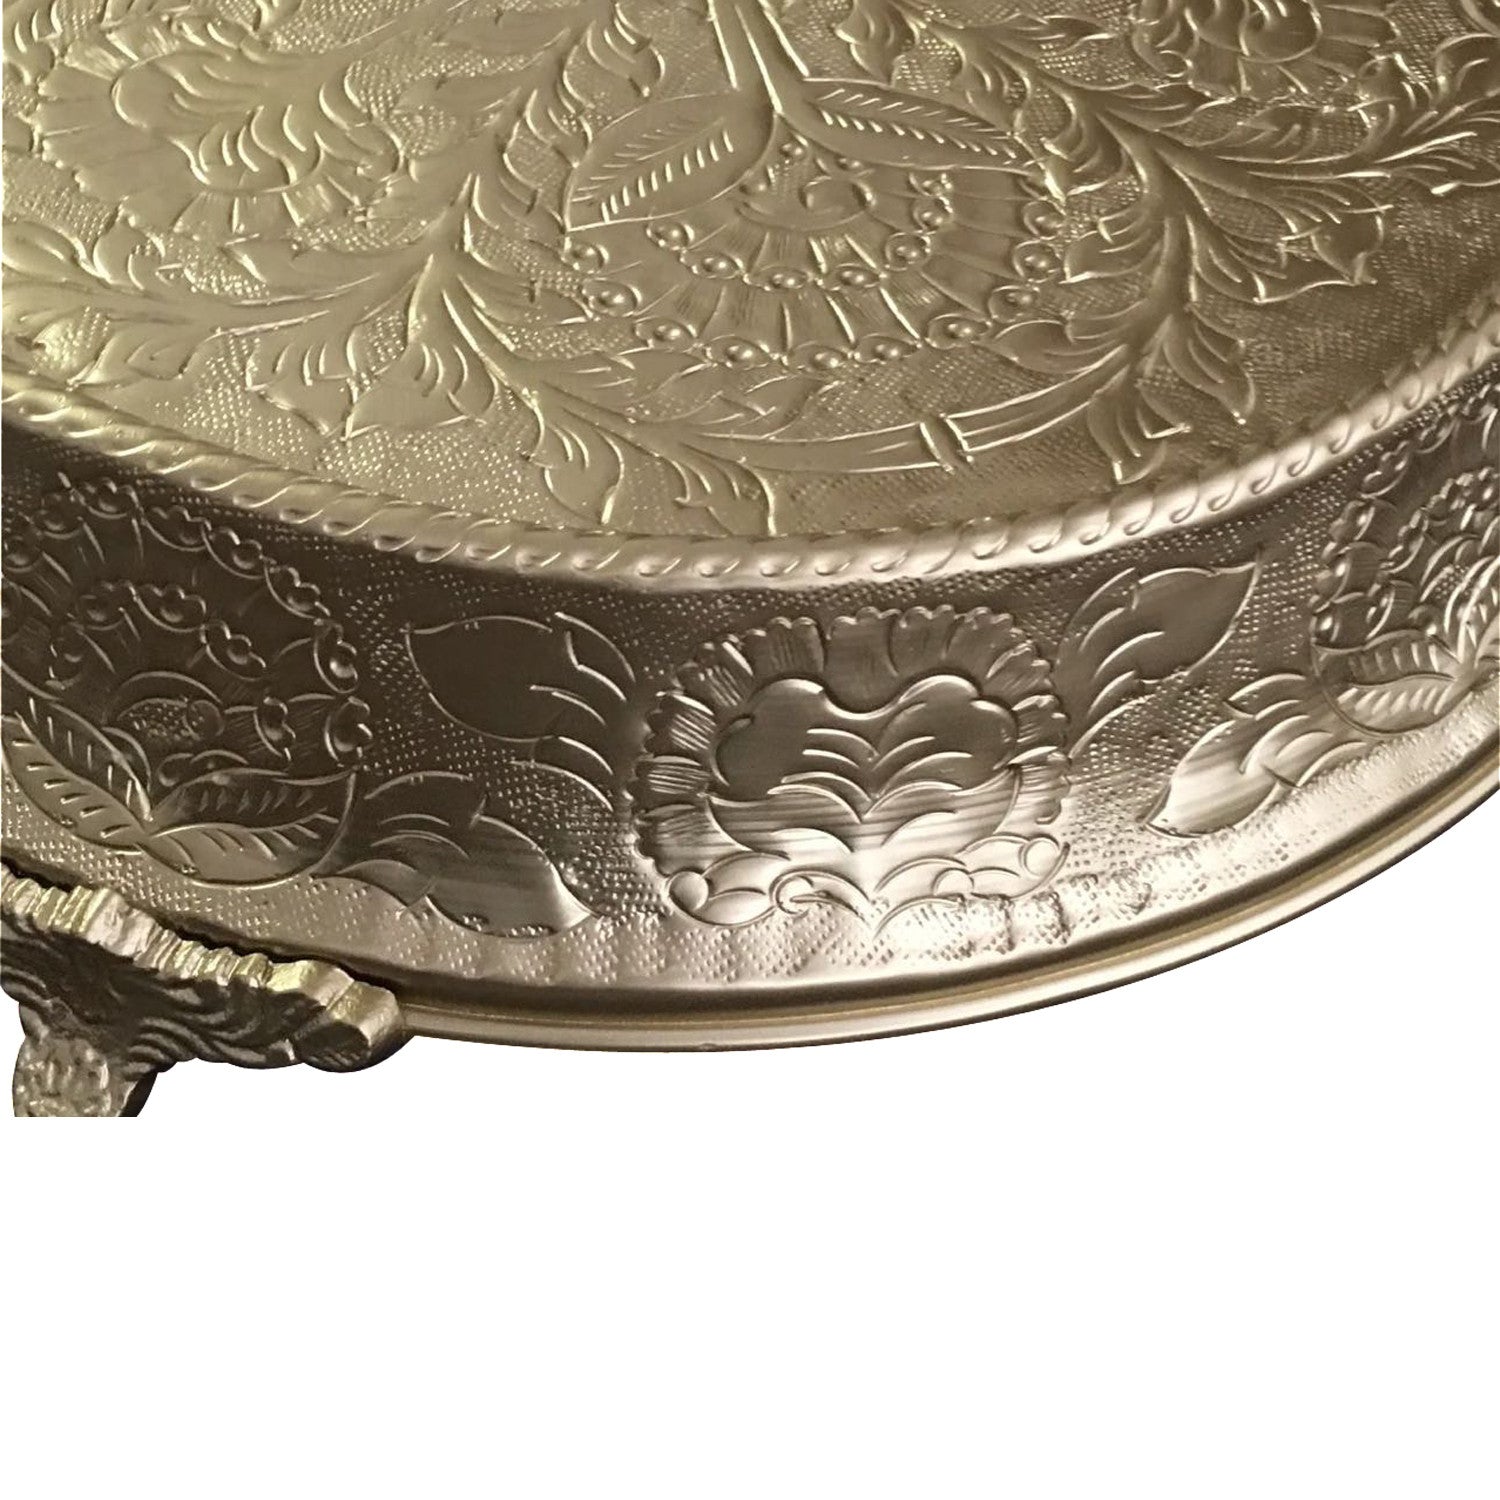 Gold Embossed Round Cake Plateau, Metal Cake Stand Cake Riser - 14